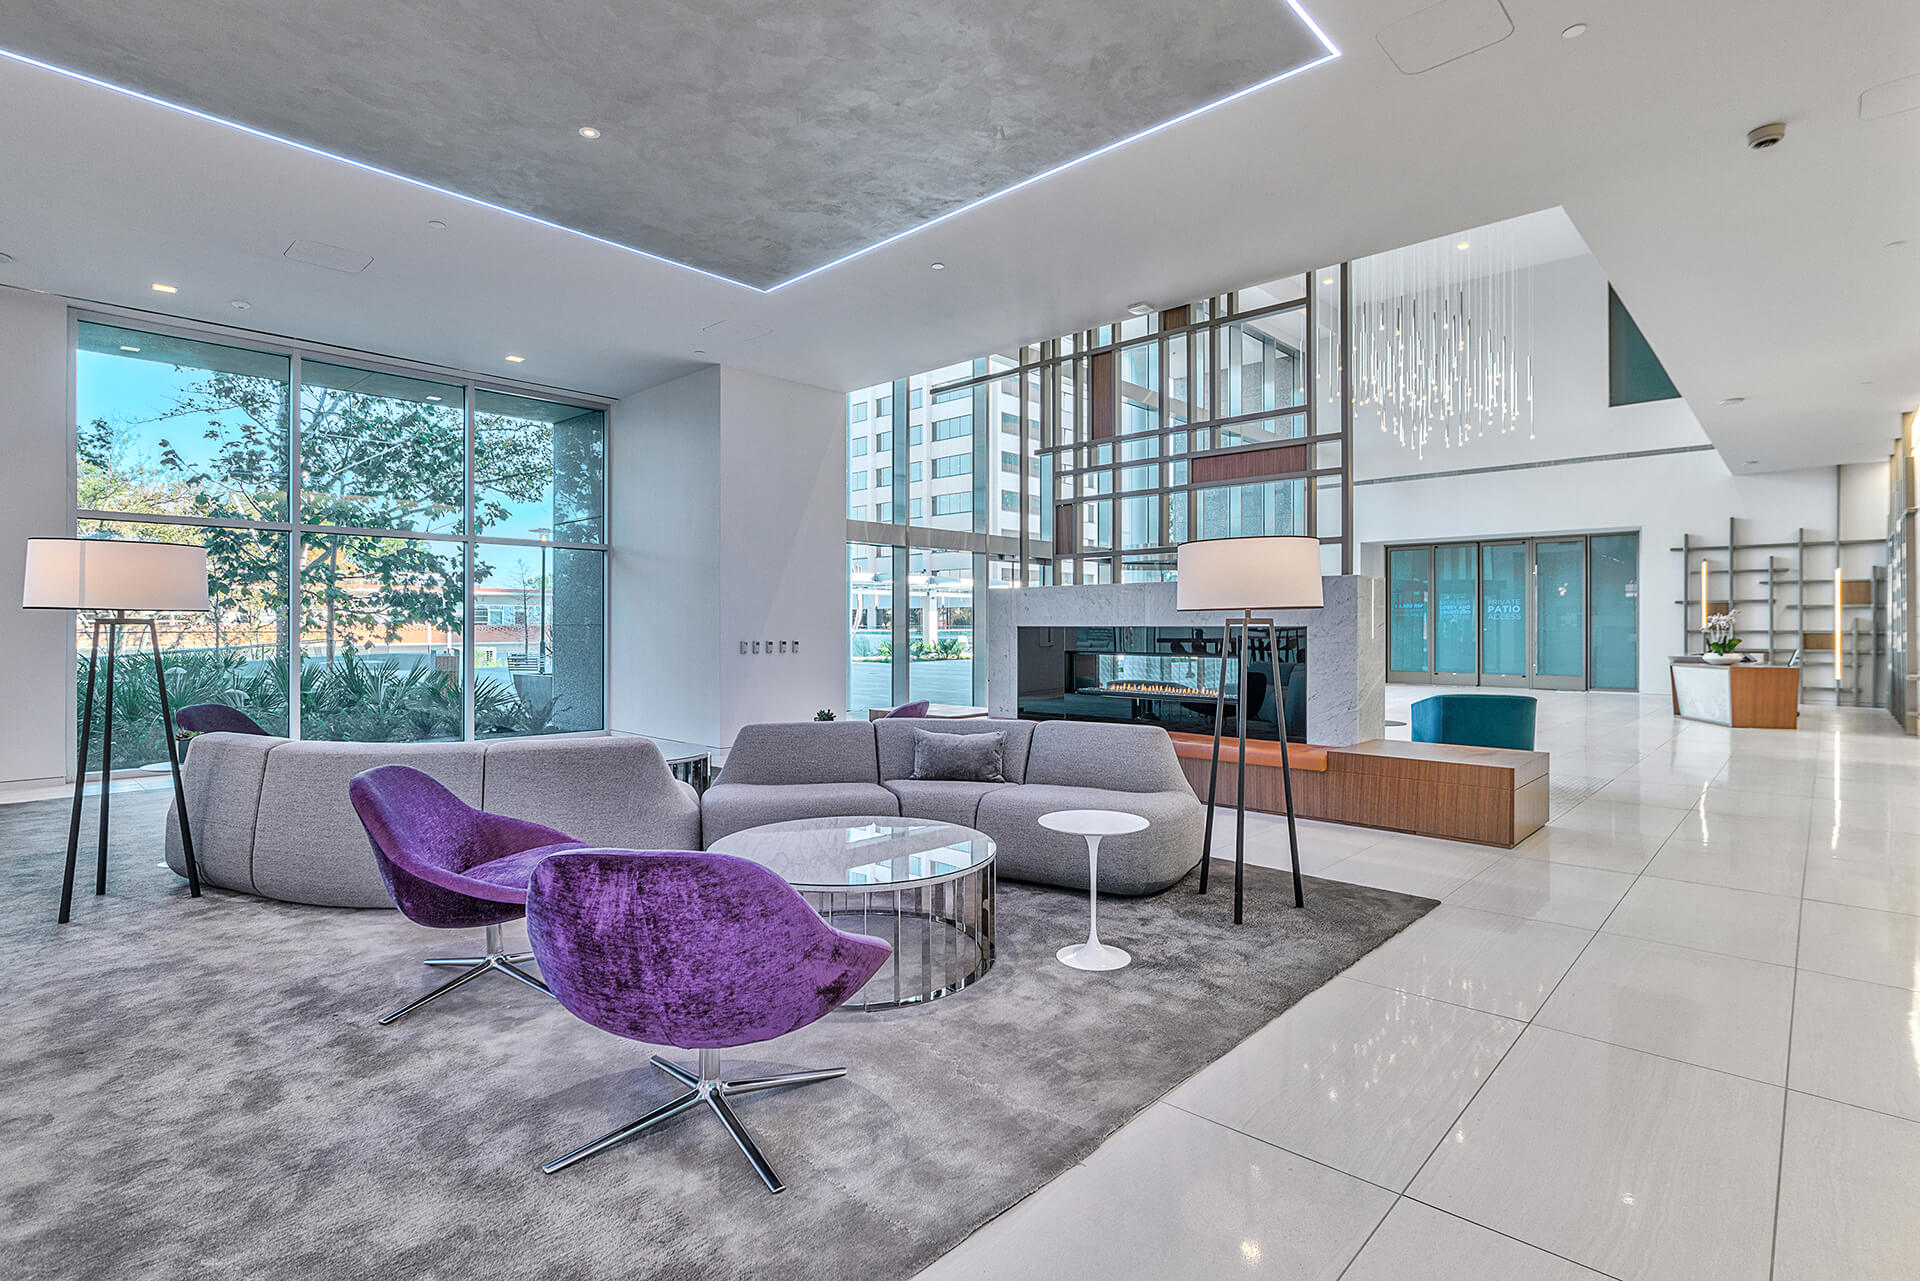 modern lobby with fireplace, couches and purple chairs at Energy Square building